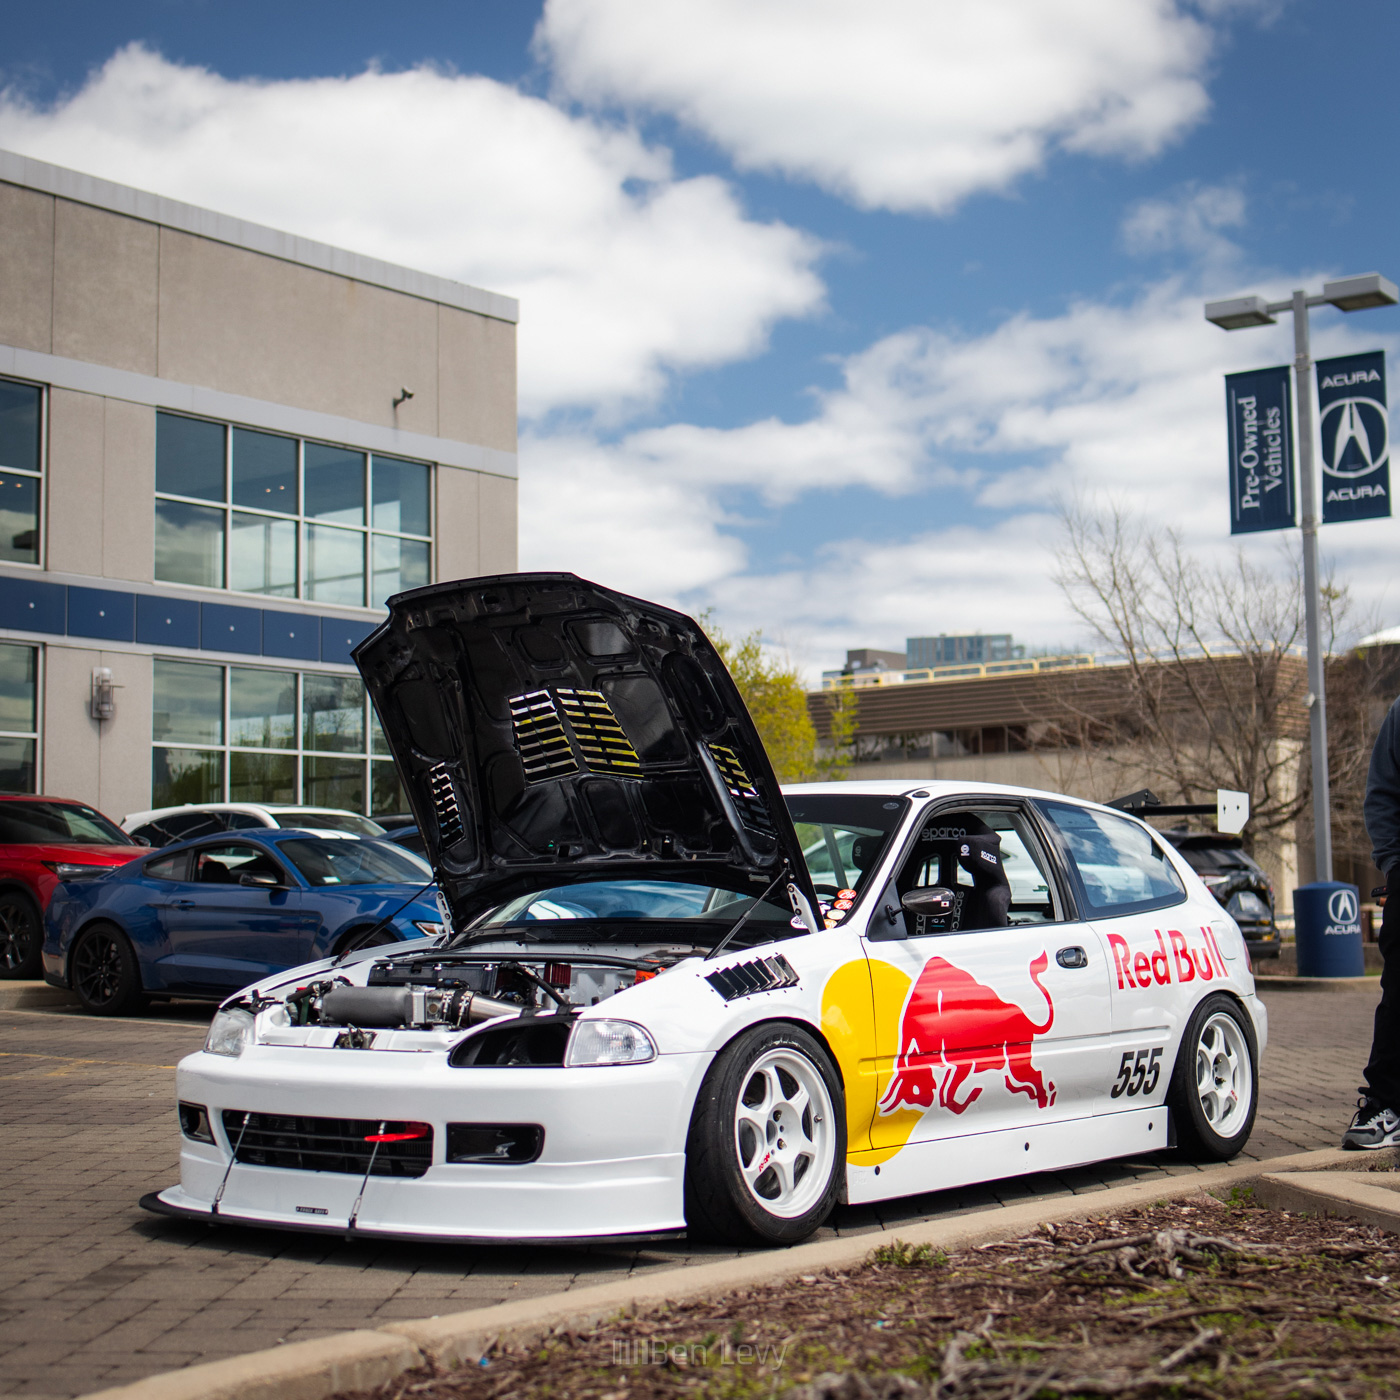 White Honda Civic Hatchback with Red Bull Livery